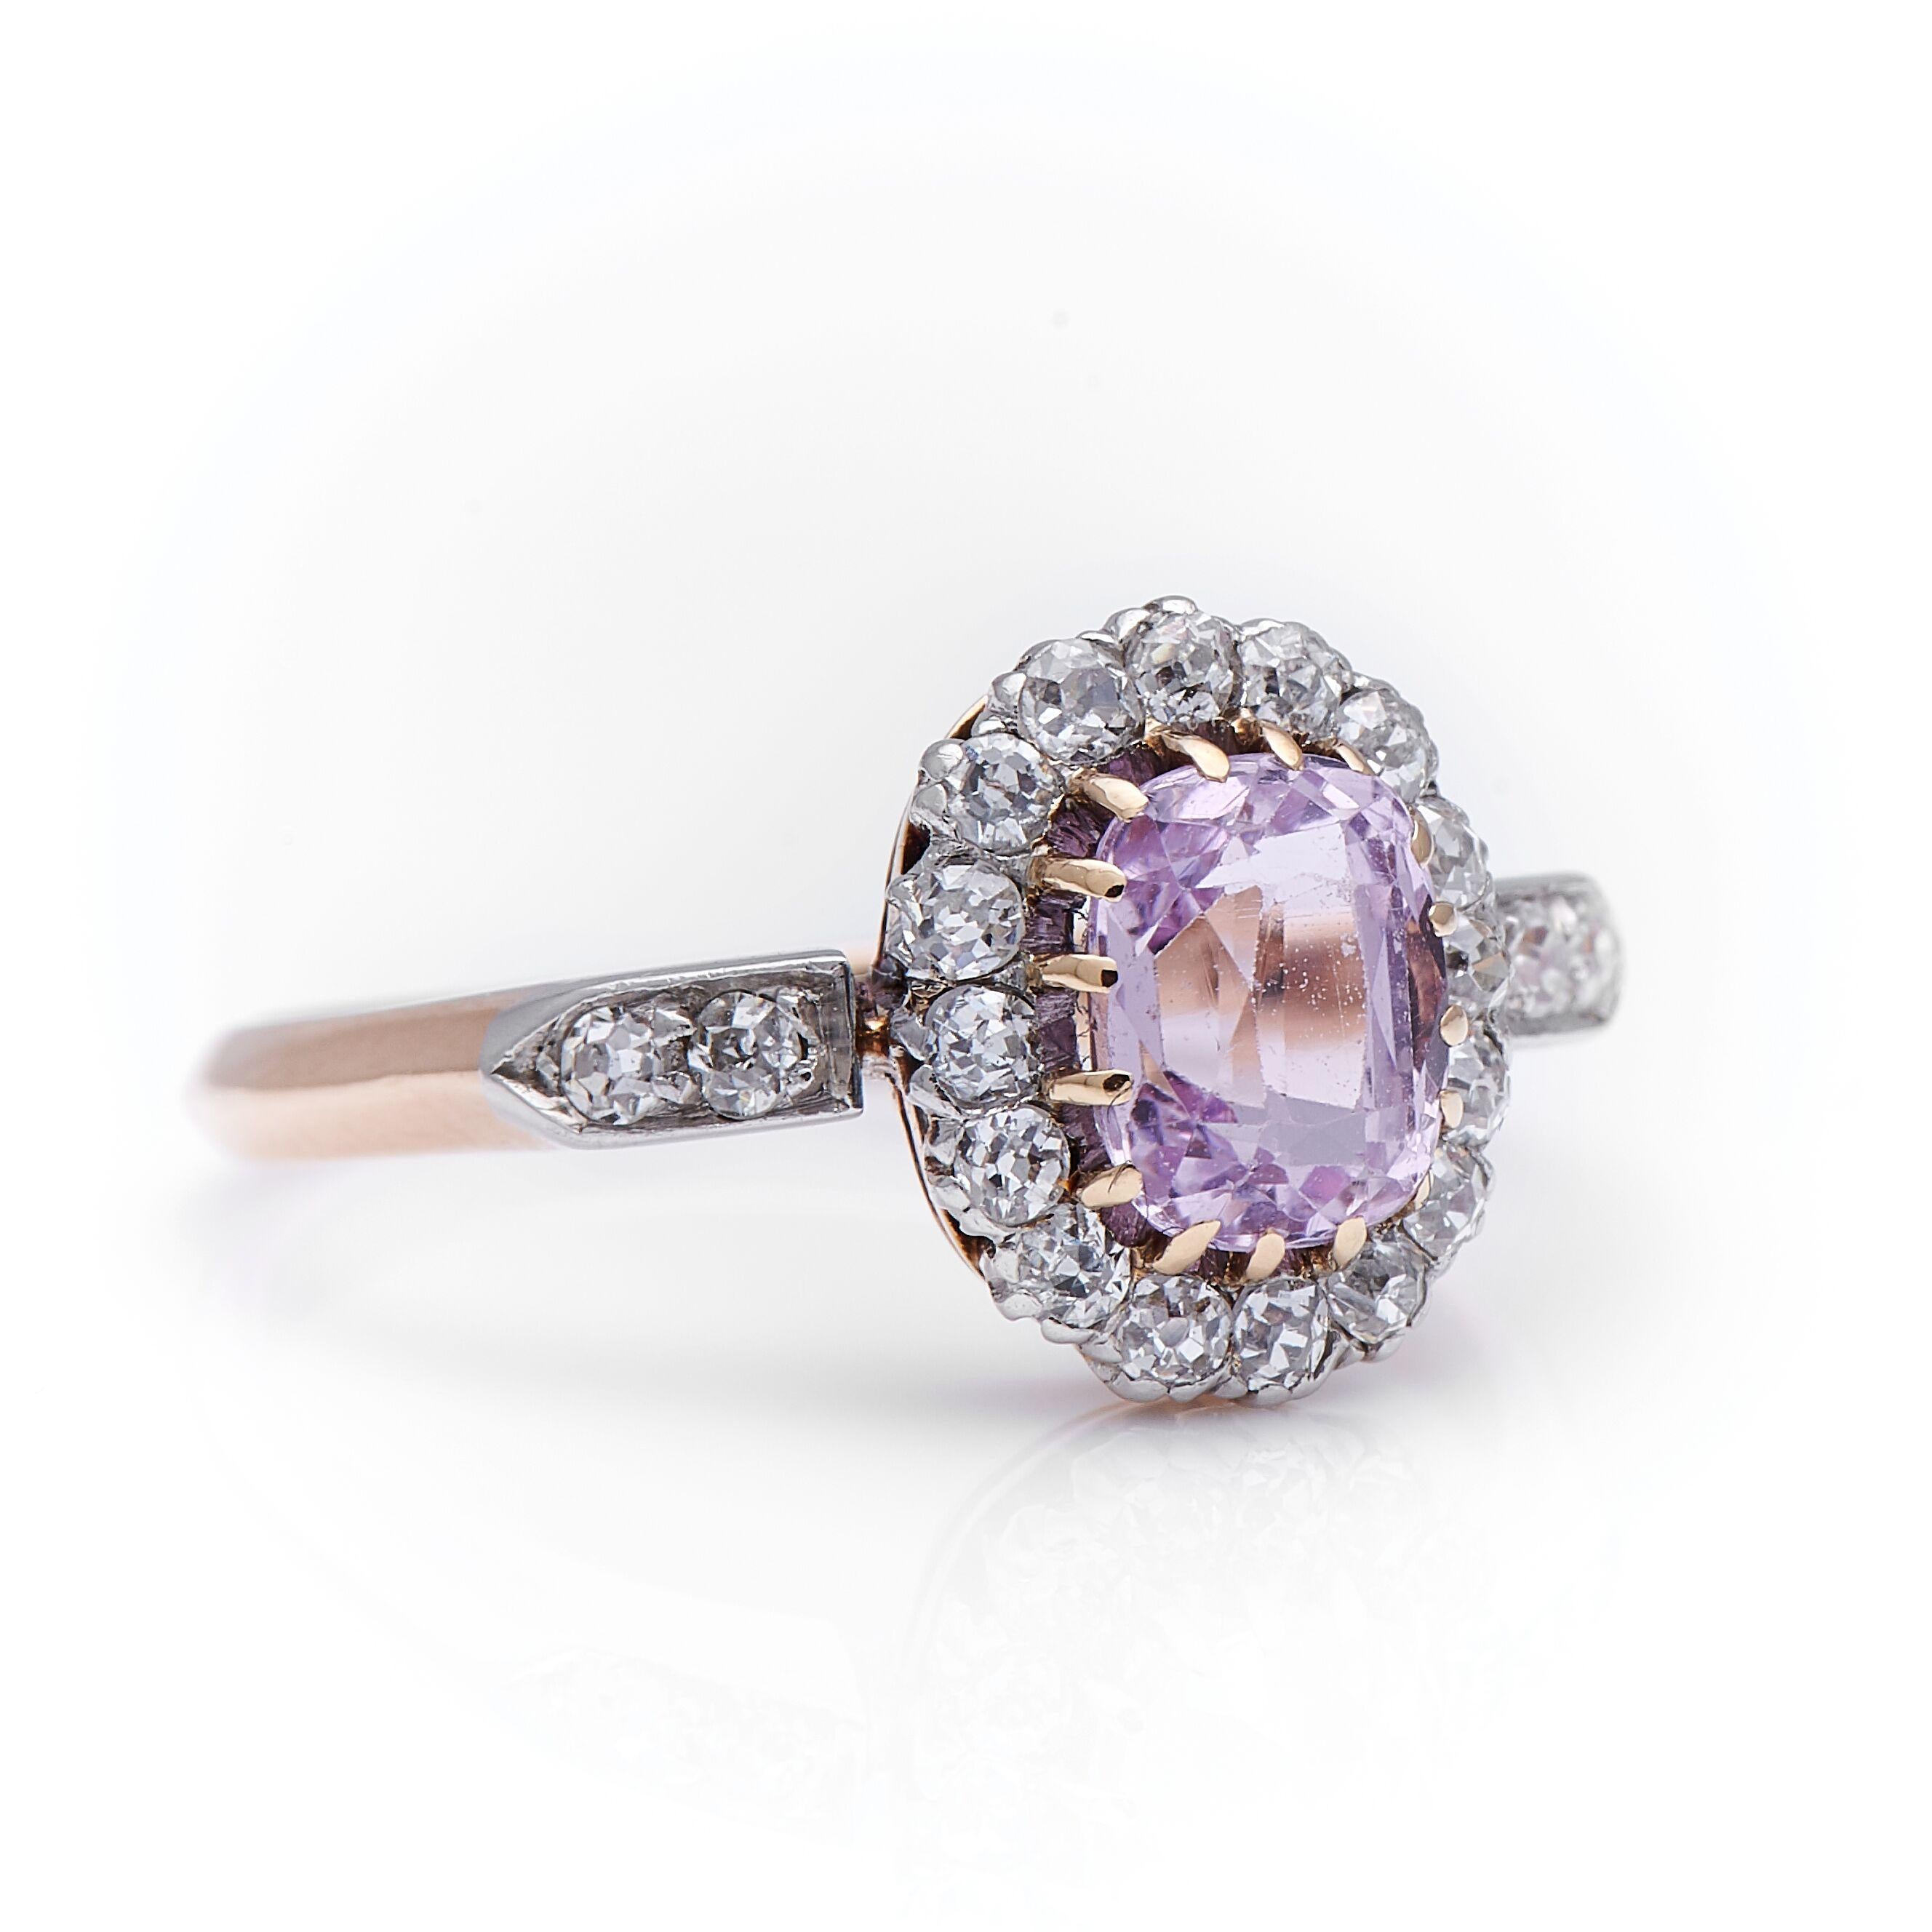 Art Deco, pink sapphire and diamond cluster ring, circa 1920. A very pretty pink sapphire centre with a delicate old-cut diamond surround all set in platinum style claw setting. The sapphire is vibrant shade of pink, a wonderful contrast to the